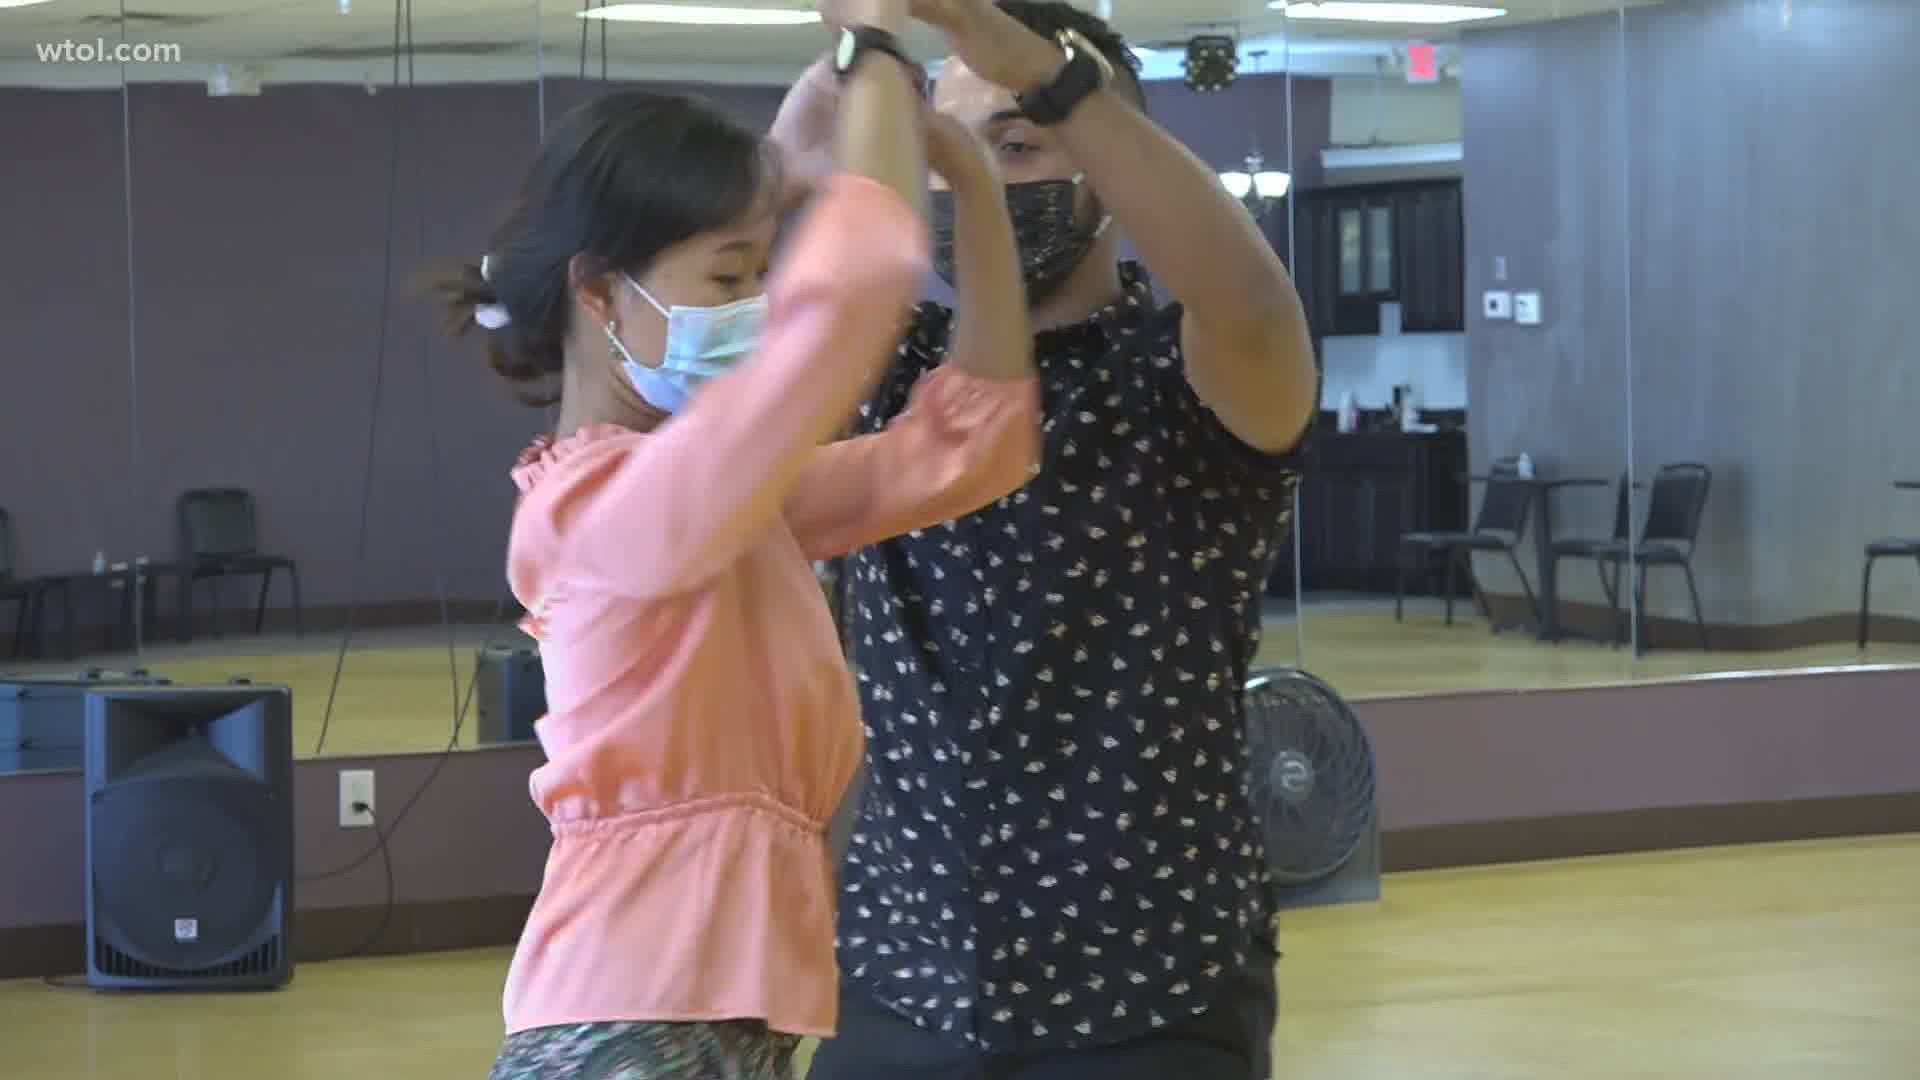 Although the studio is only hosting private lessons due to social-distancing concerns, dancers are finding relief by connecting with their creative sides again.